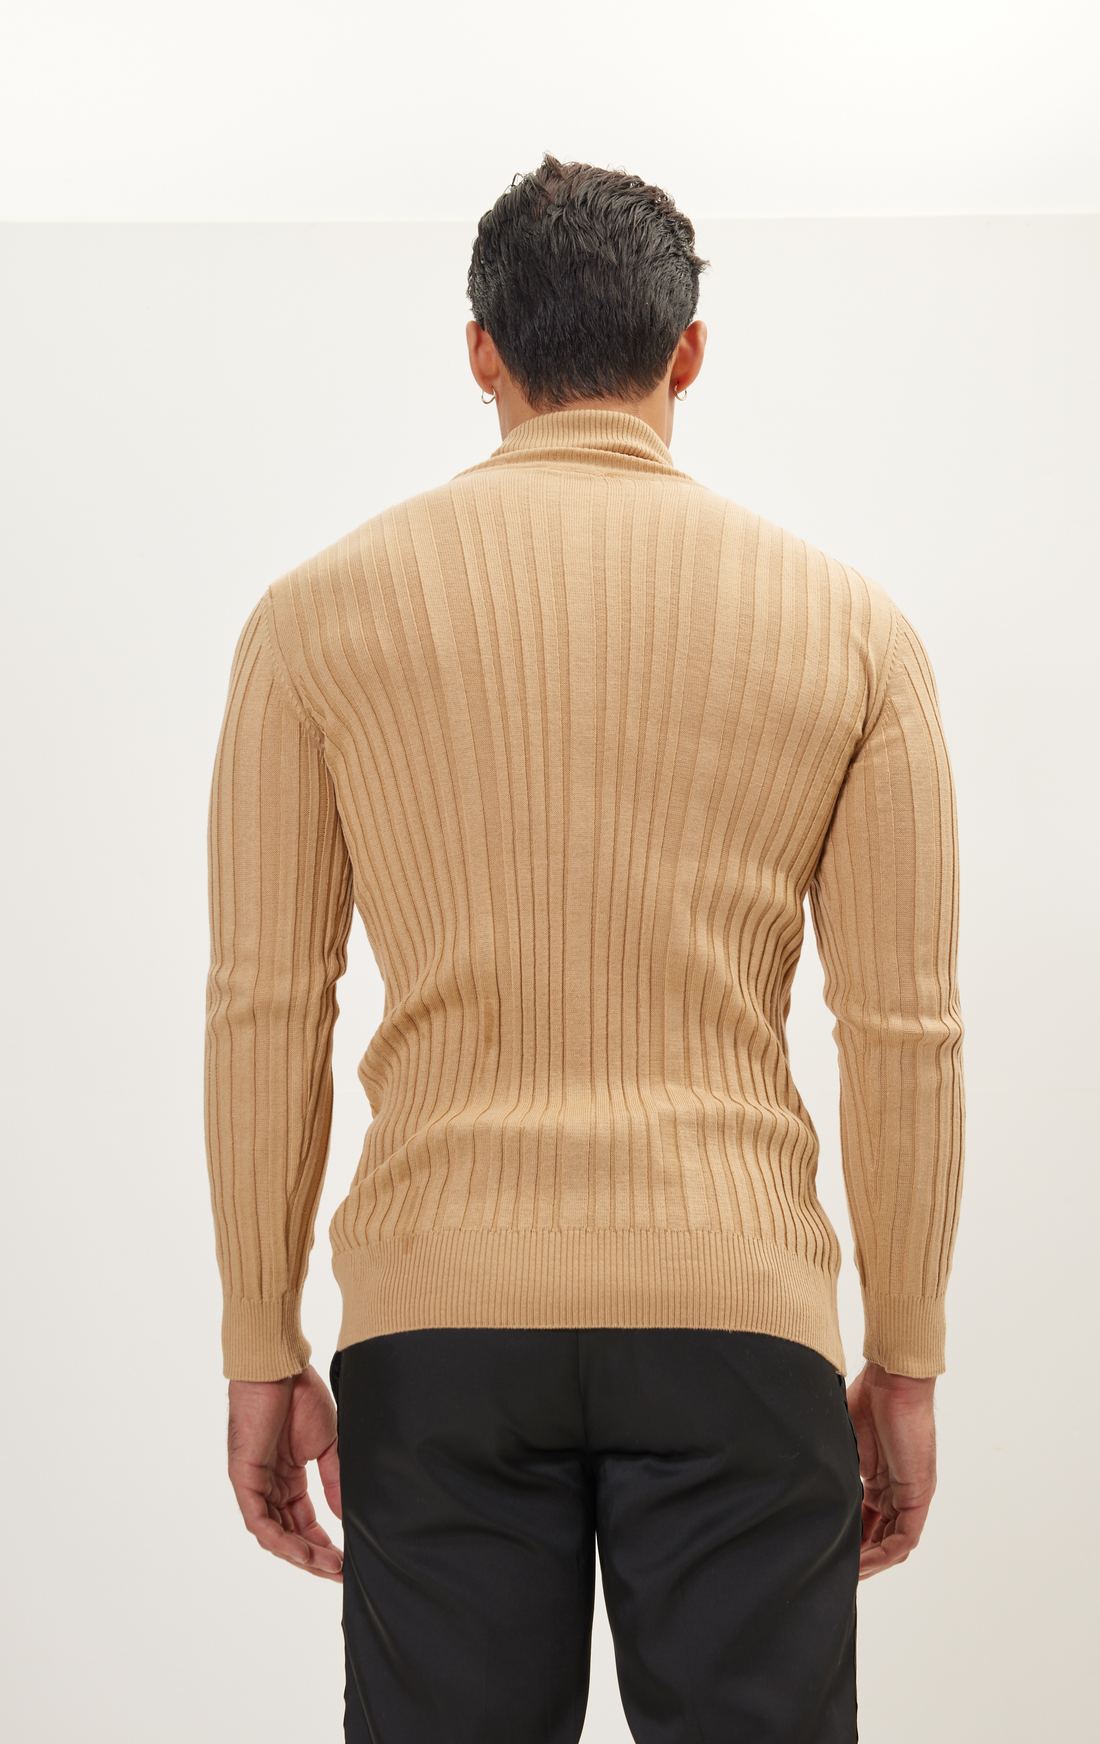 N° 6175 RT ROLL NECK RIBBED SWEATER - CAMEL